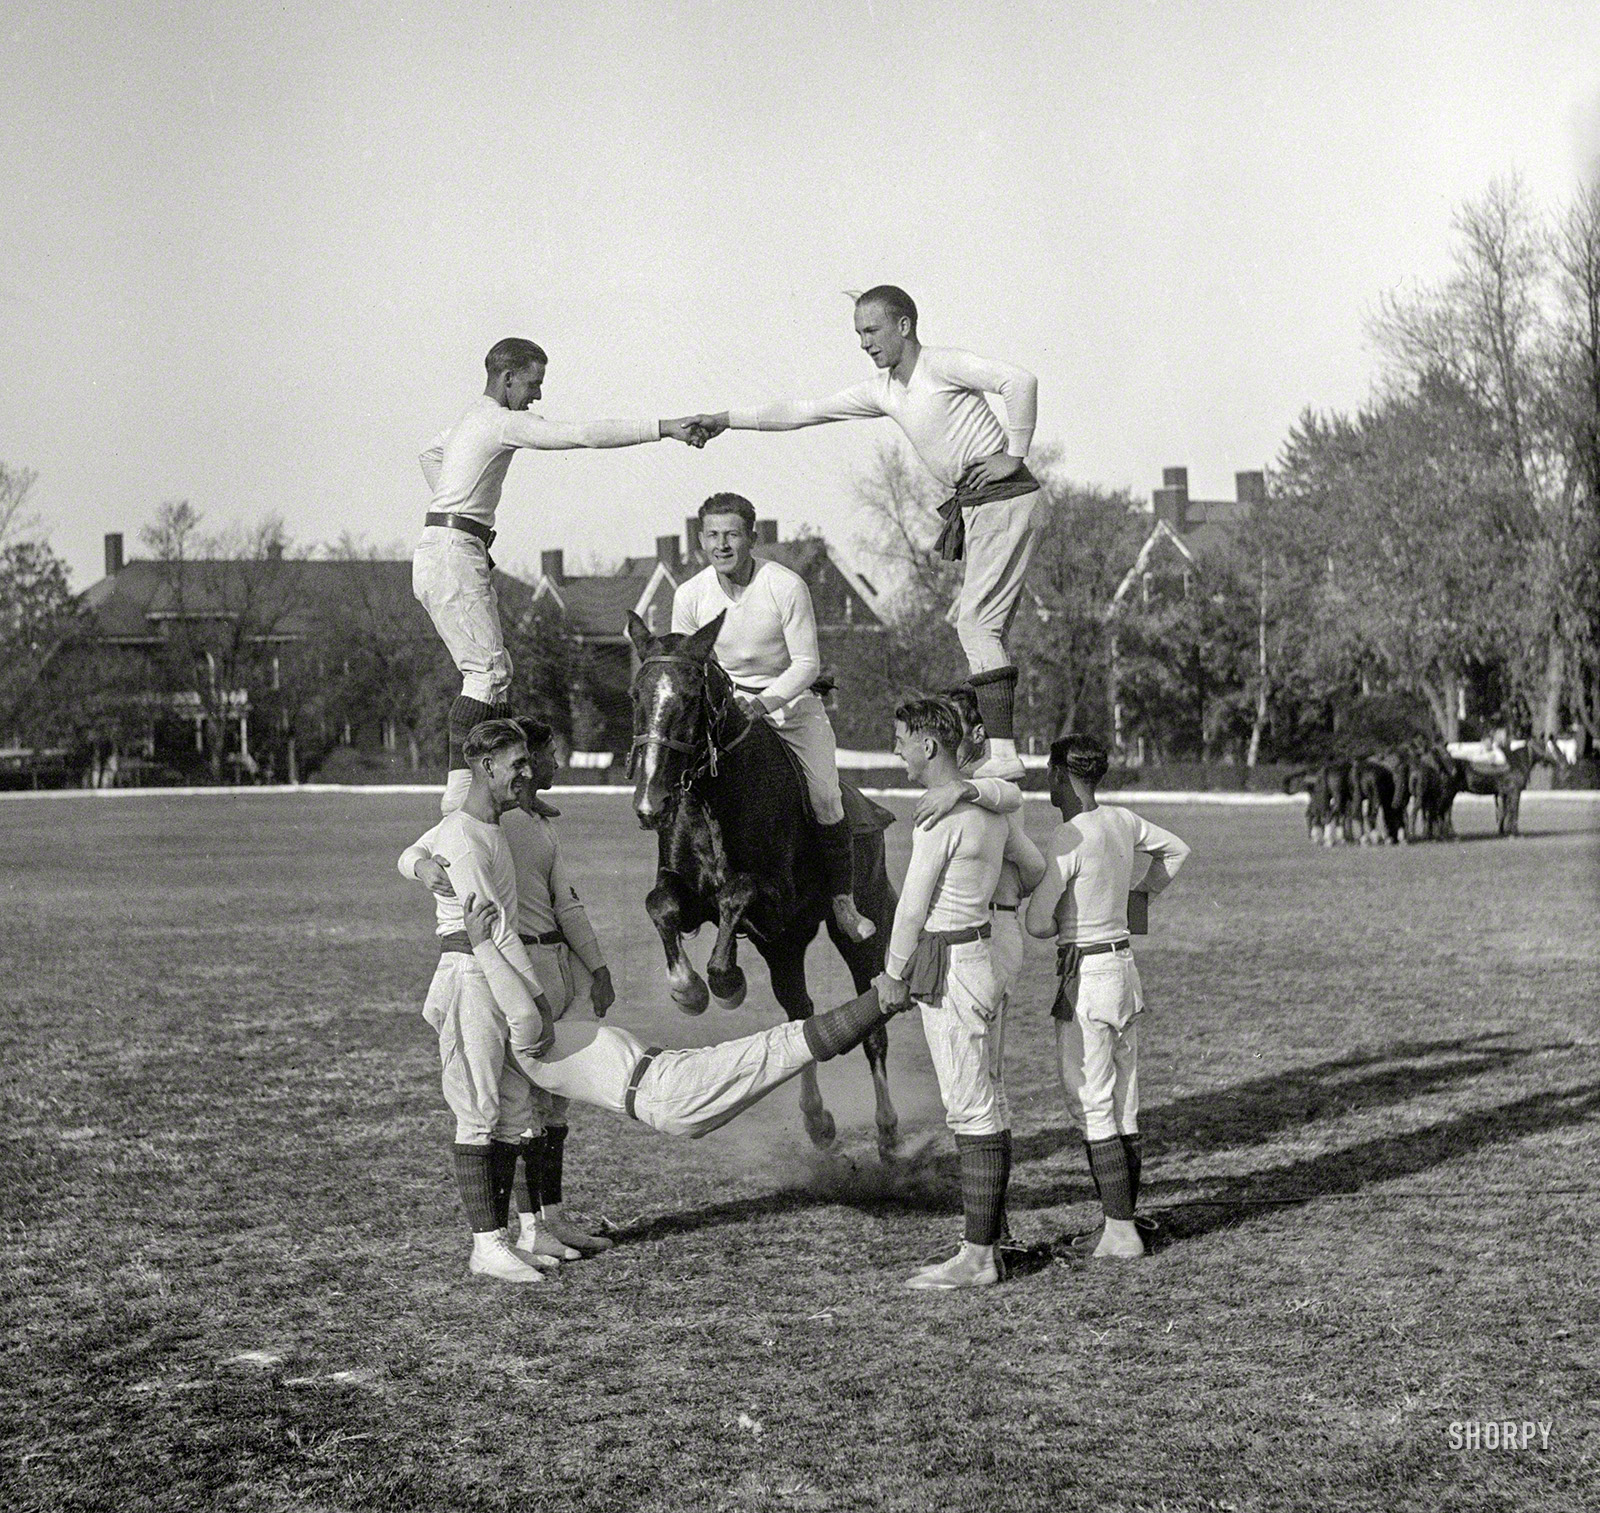 Washington, D.C., 1930. "NO CAPTION (horse jumping through group of men)." Harris & Ewing Collection glass negative. View full size.